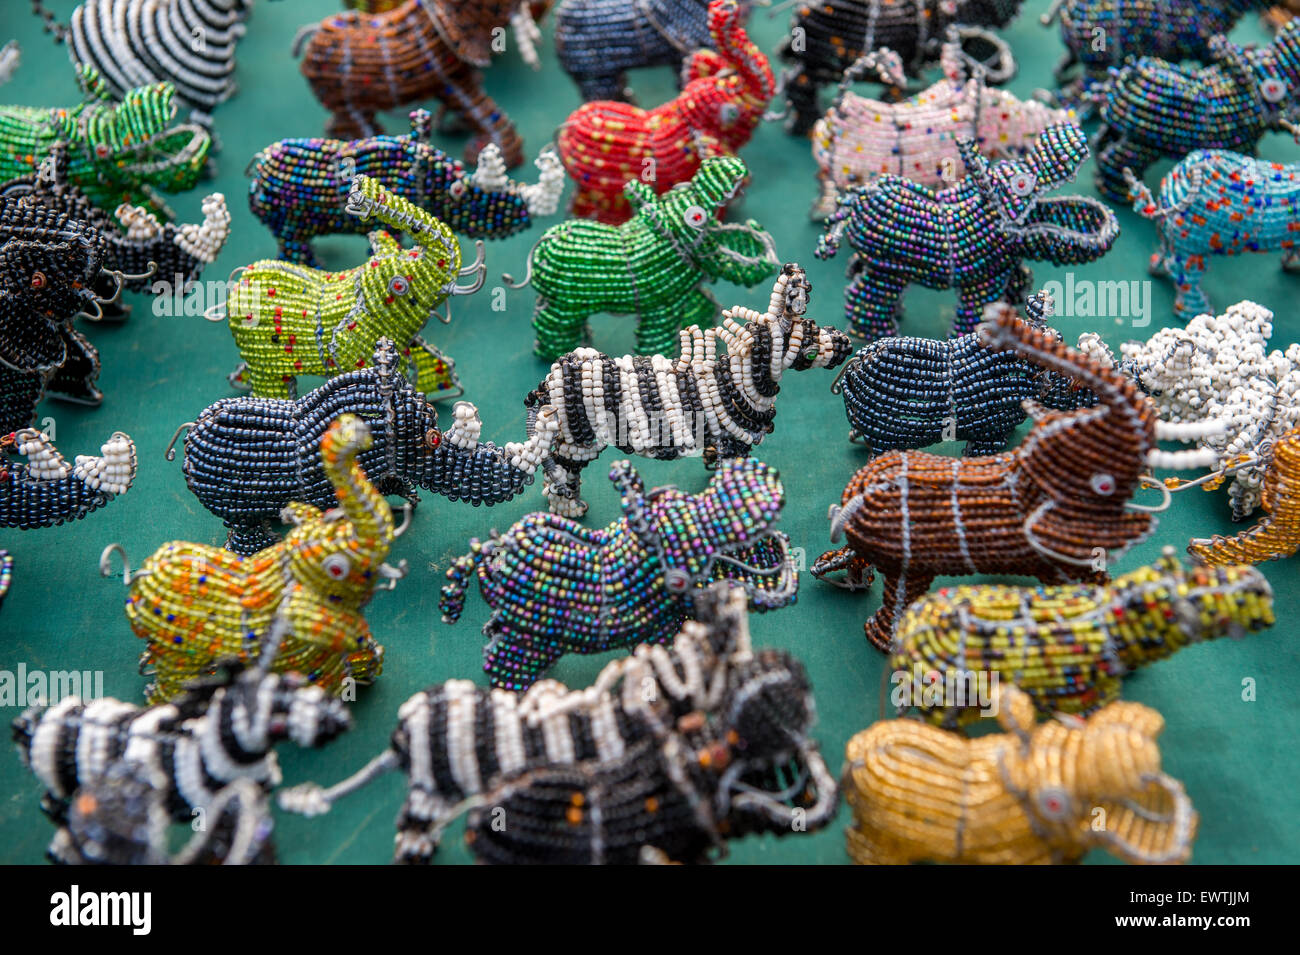 SOUTH AFRICA- Hand made decorations for sale at farmers market in Pretoria Stock Photo